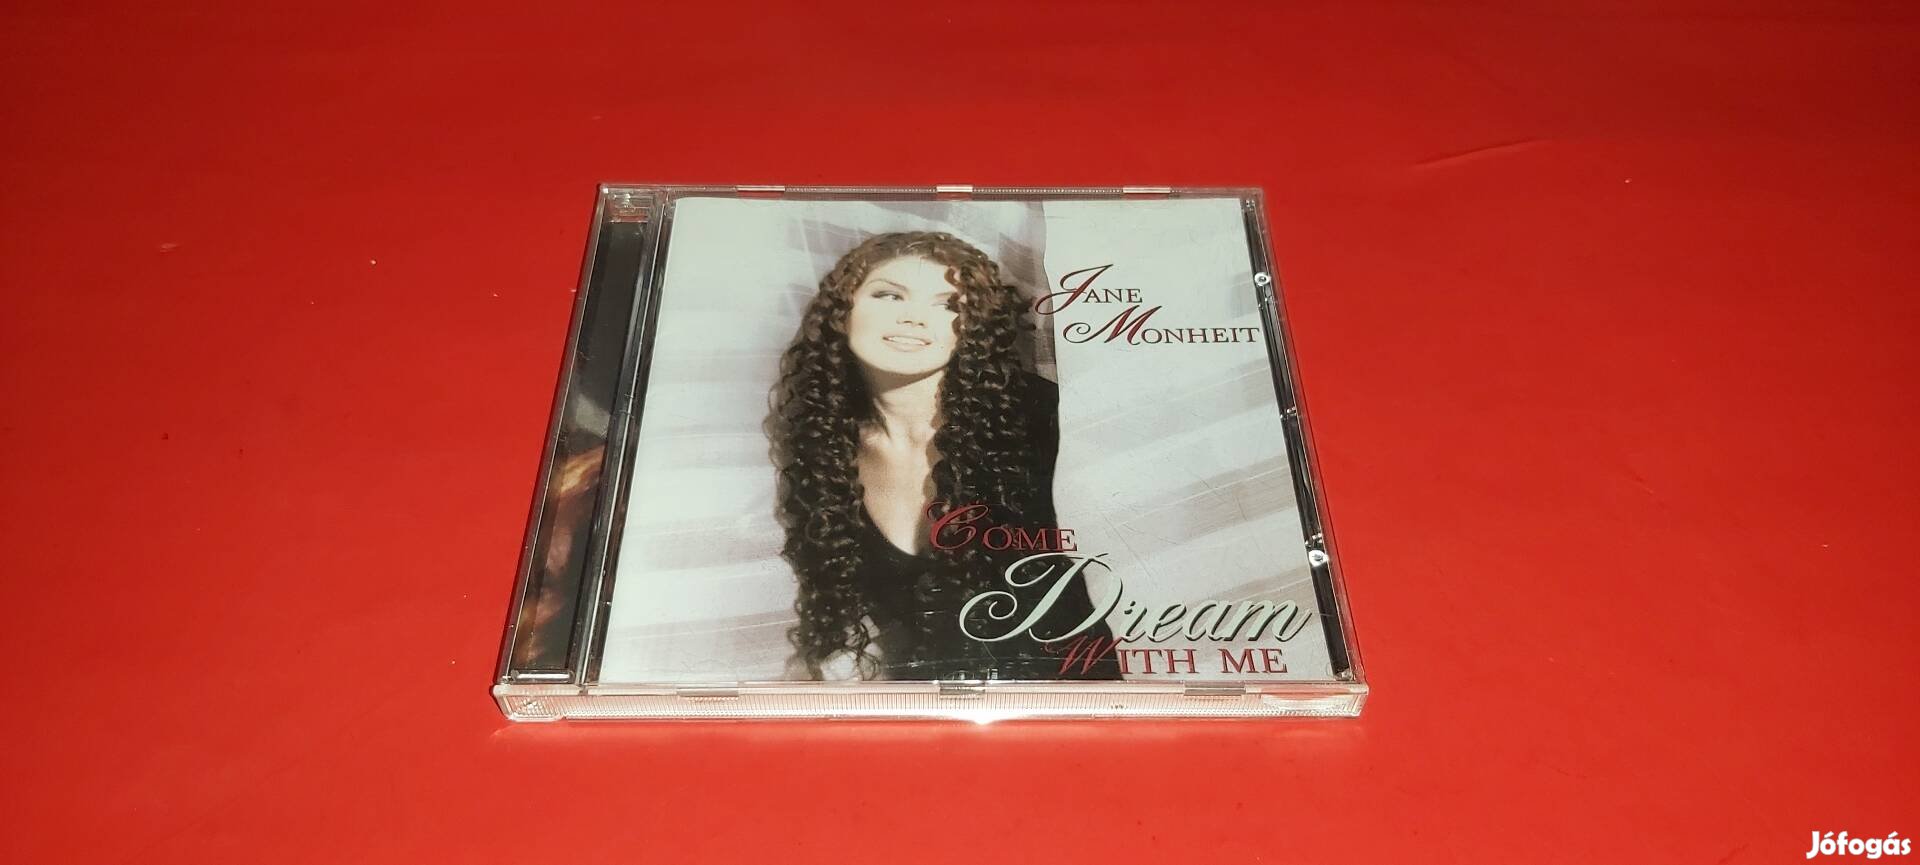 Jane Monheit Come dream with me Cd 2001